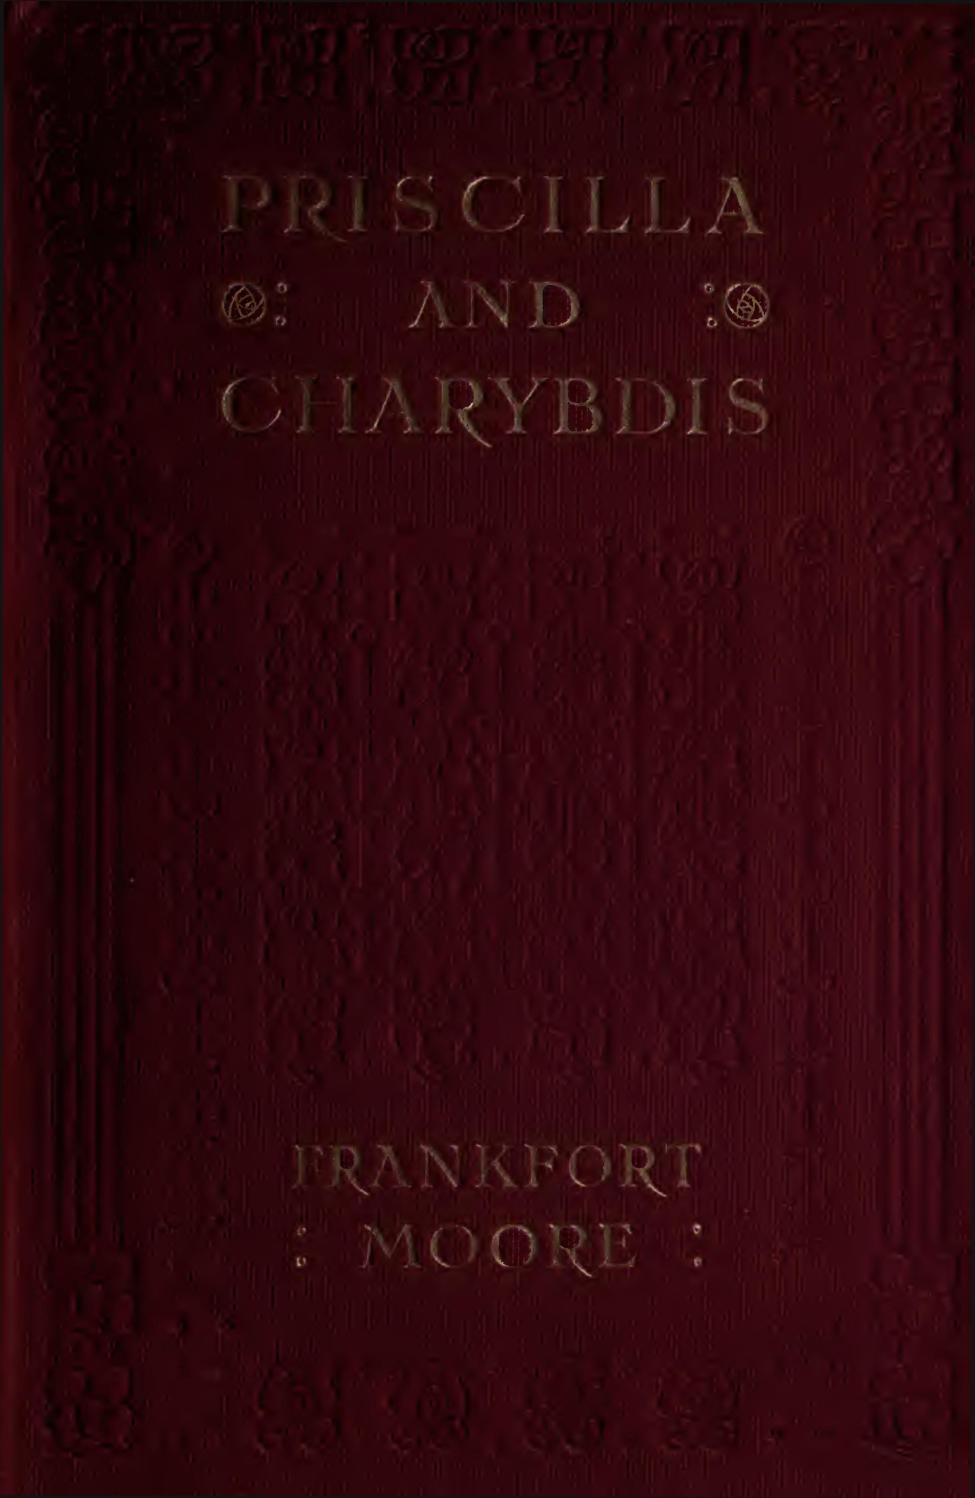 Priscilla and Charybdis, by Frank Frankfort Moore